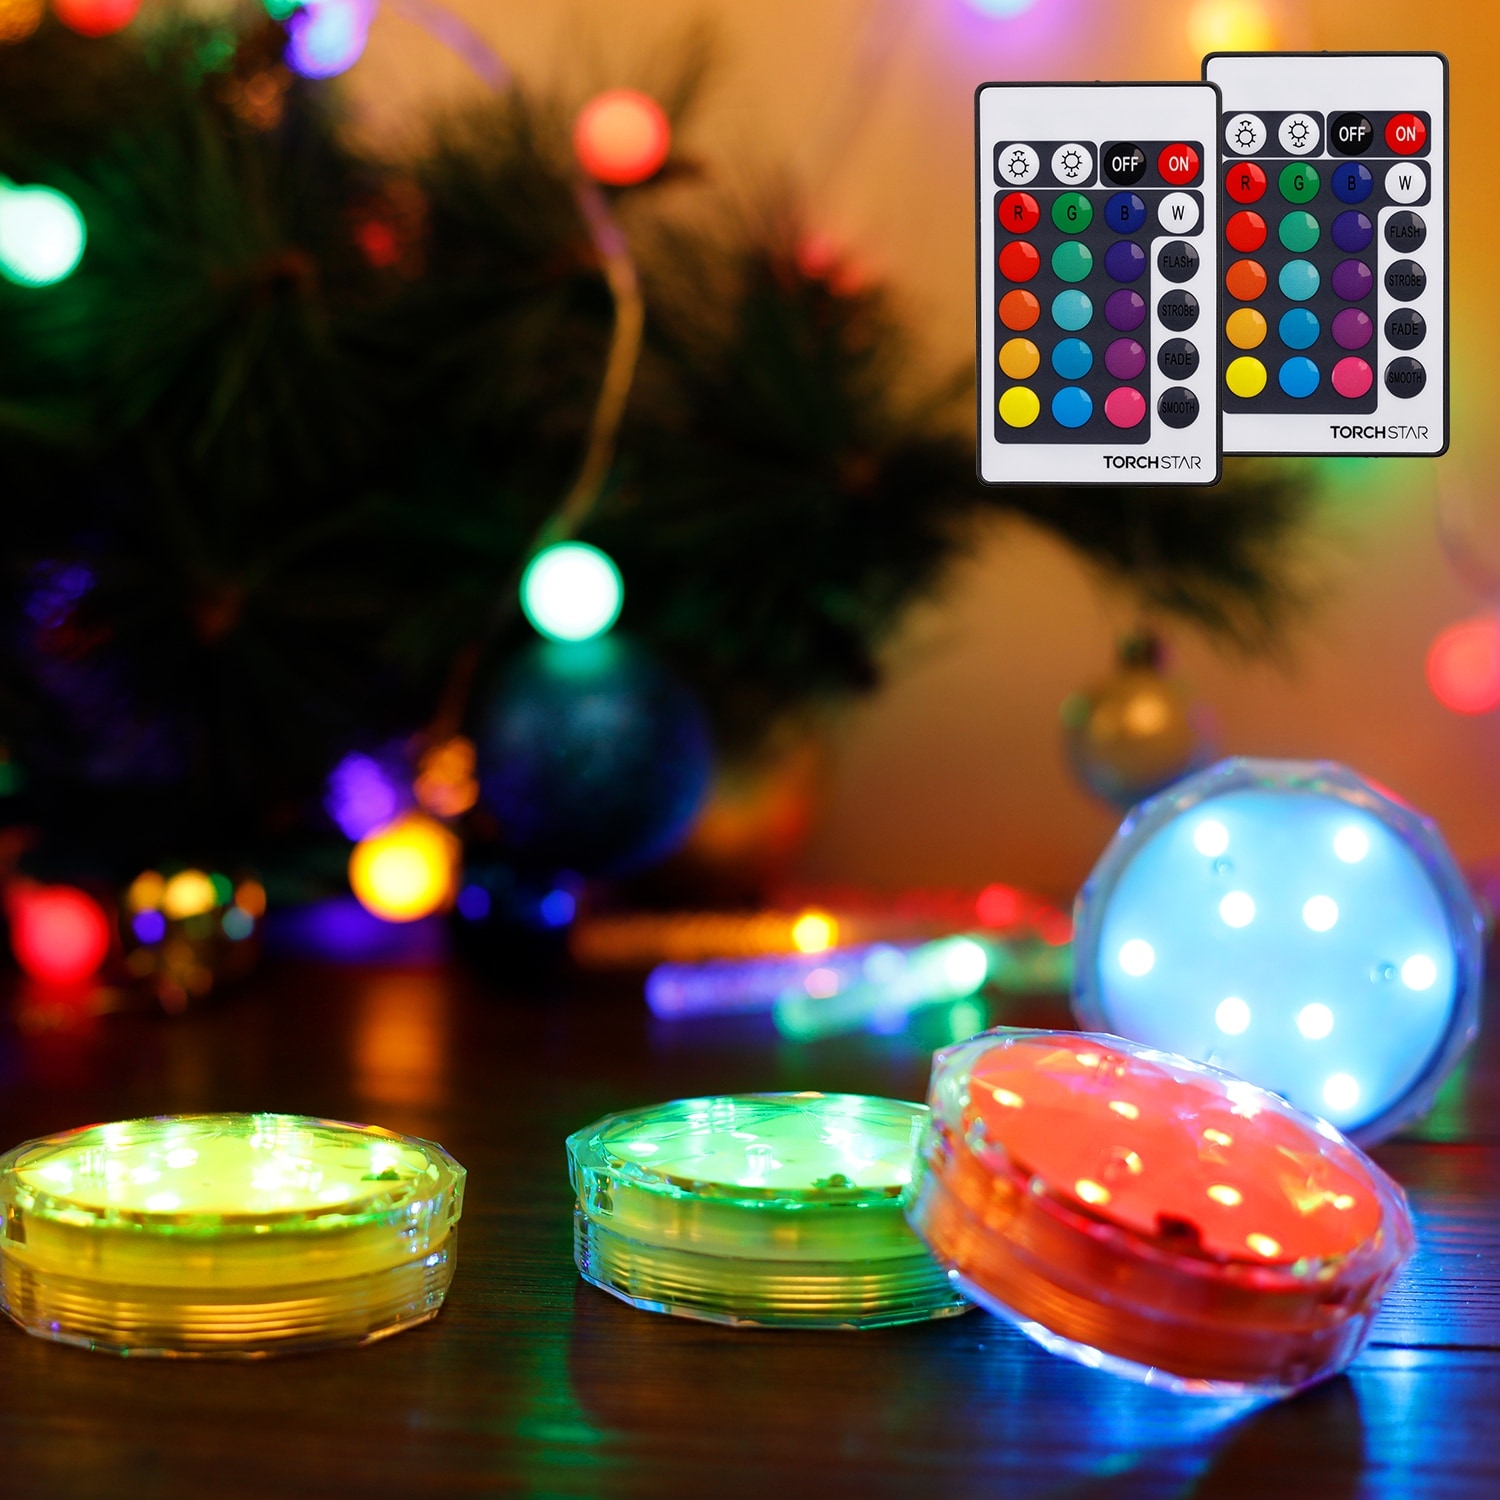 4 Remote Control LED Light Self Adhesive Dimmer Wireless Closet Lamp Multi  Color